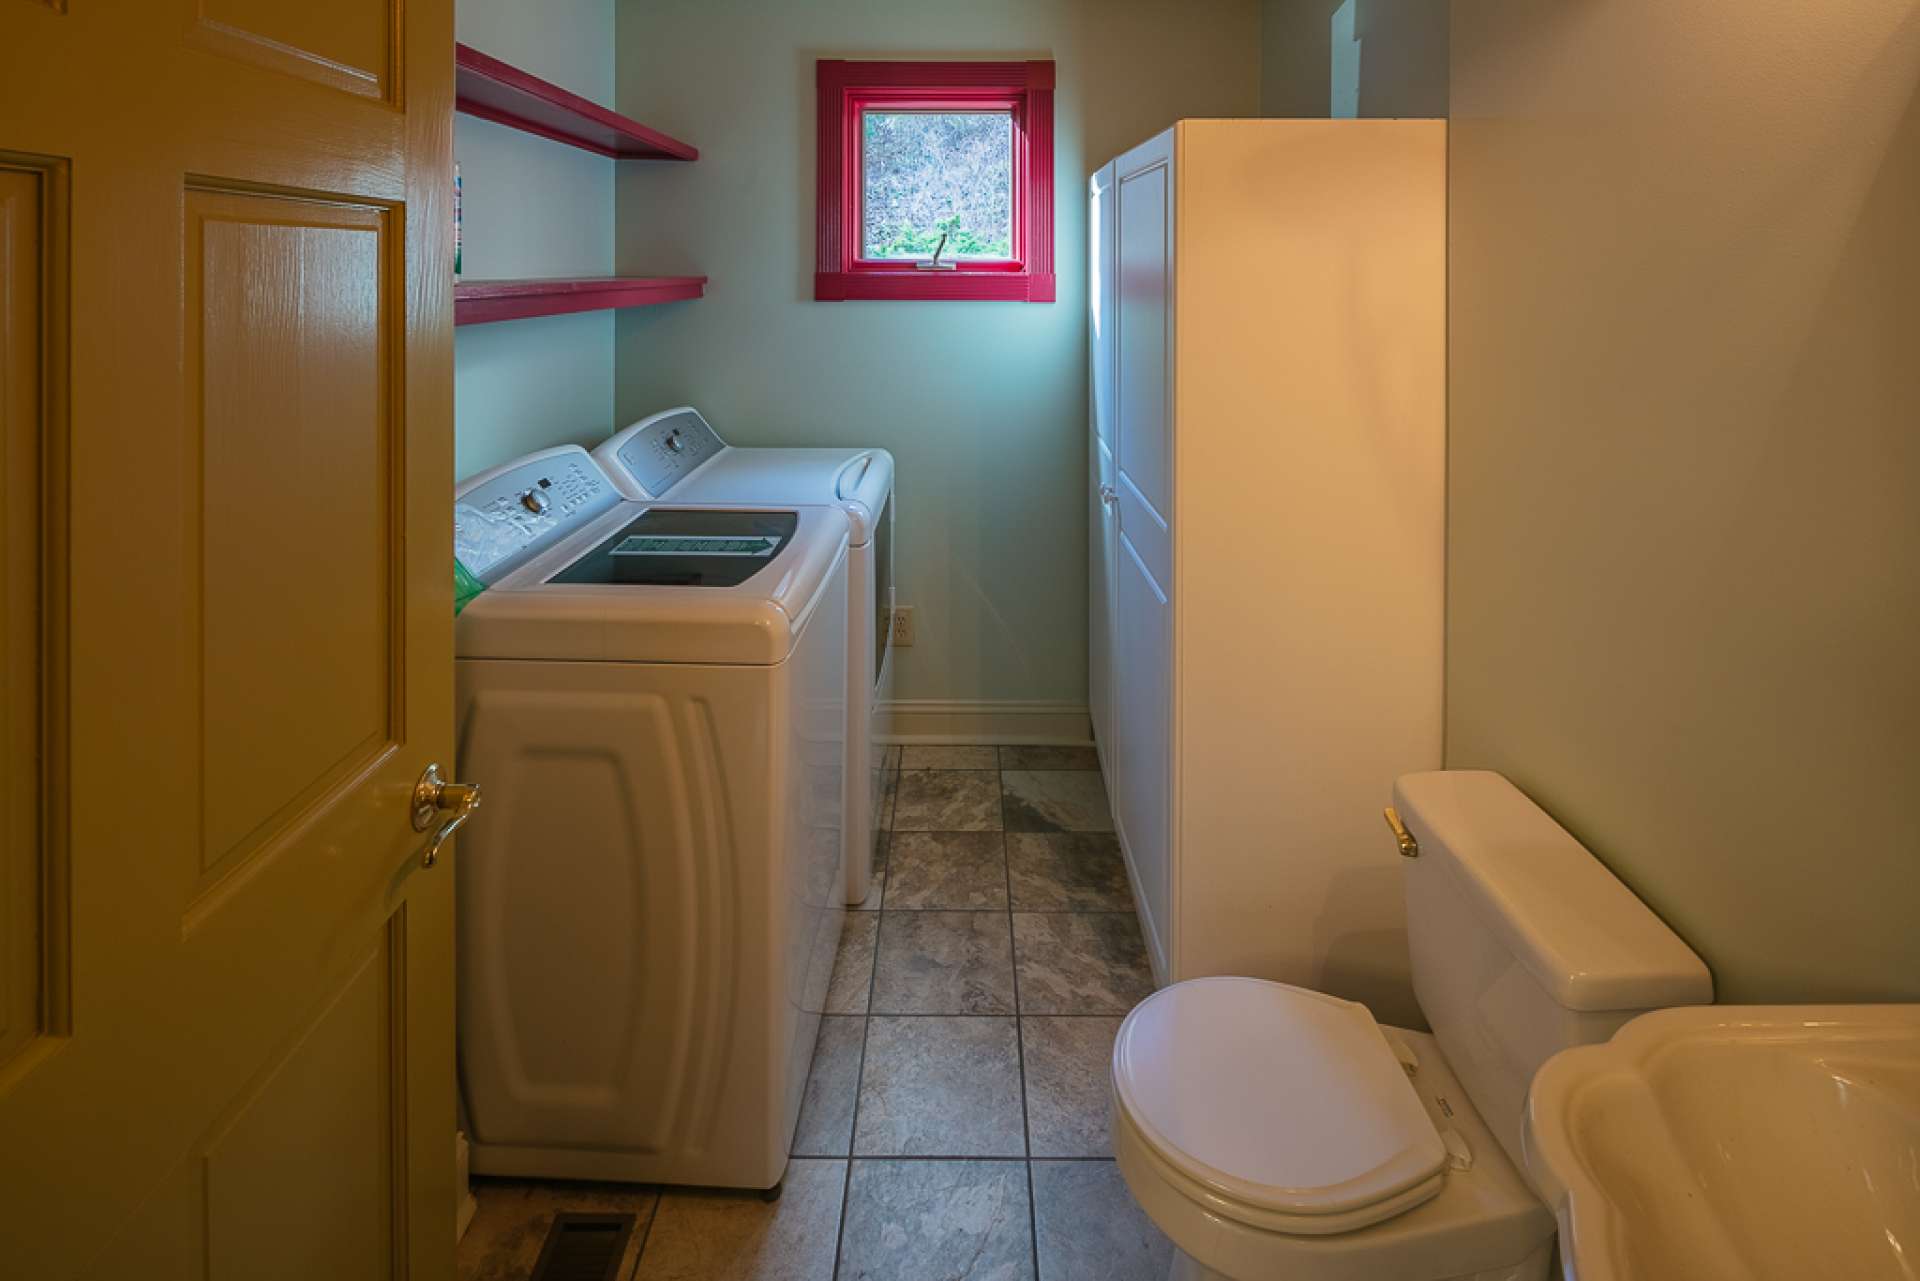 A laundry room with half bath completes the main level.